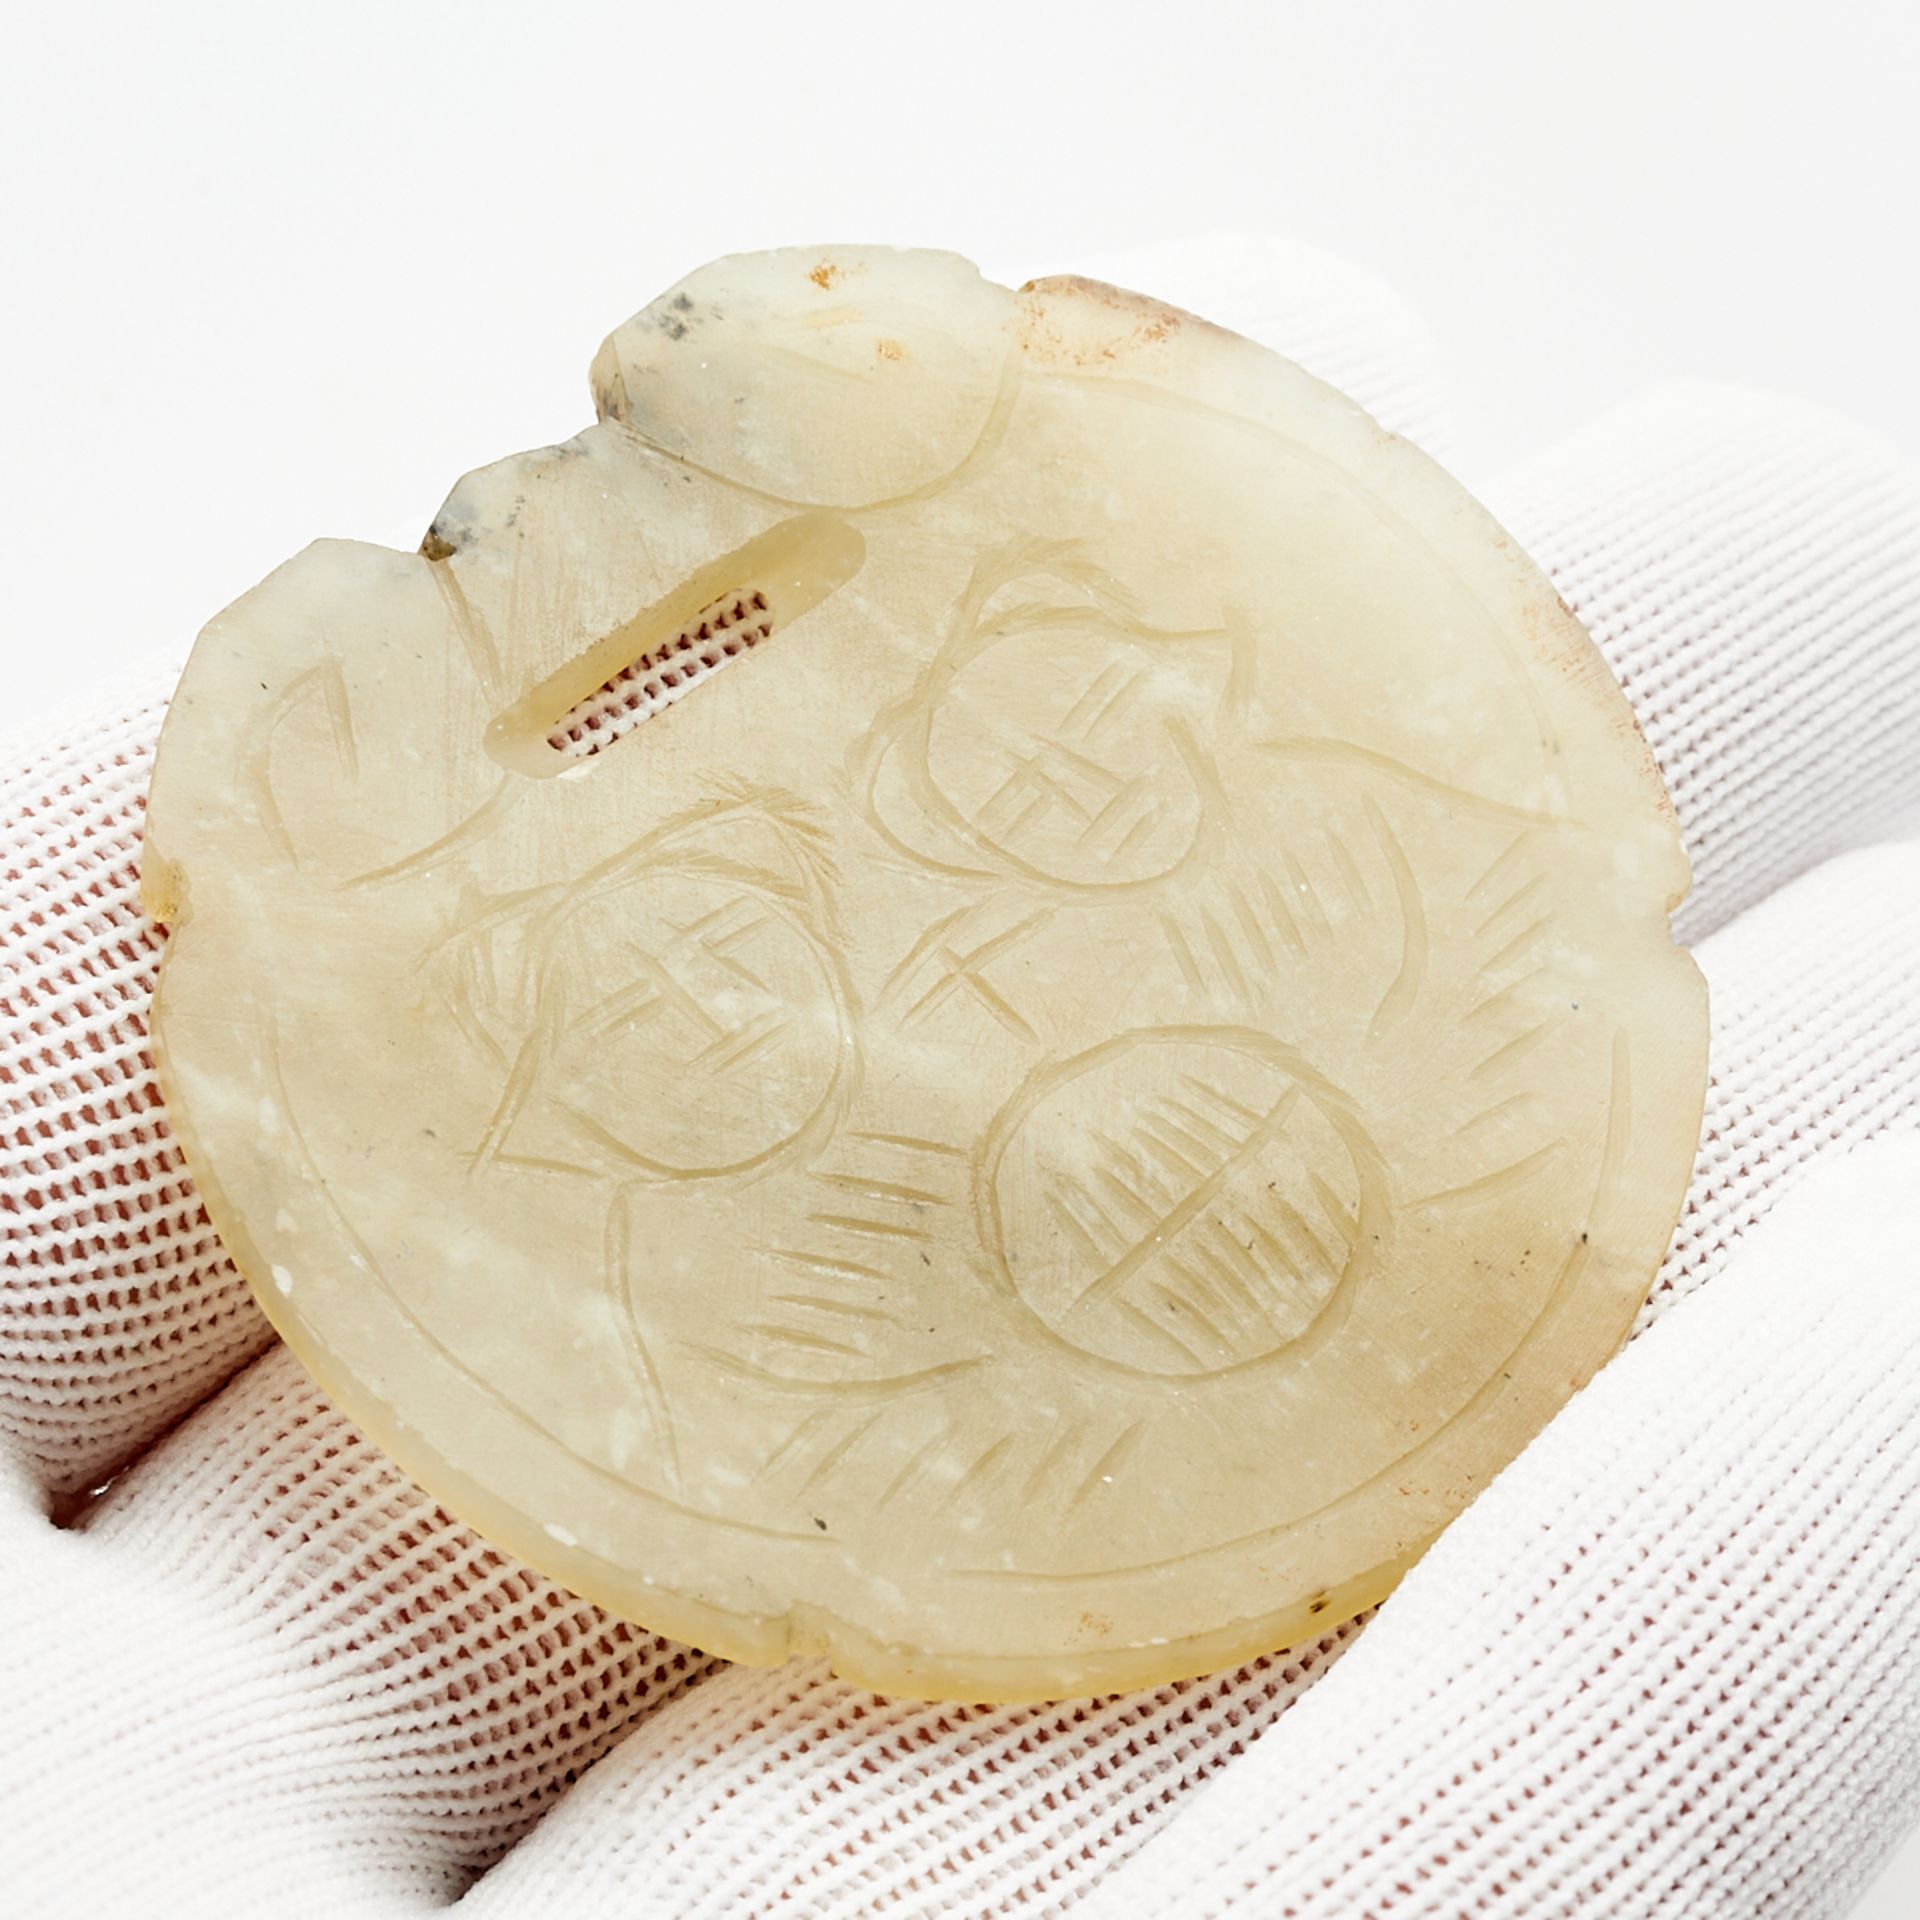 Group of 5 Chinese Carved Hardstone Items - Image 6 of 8